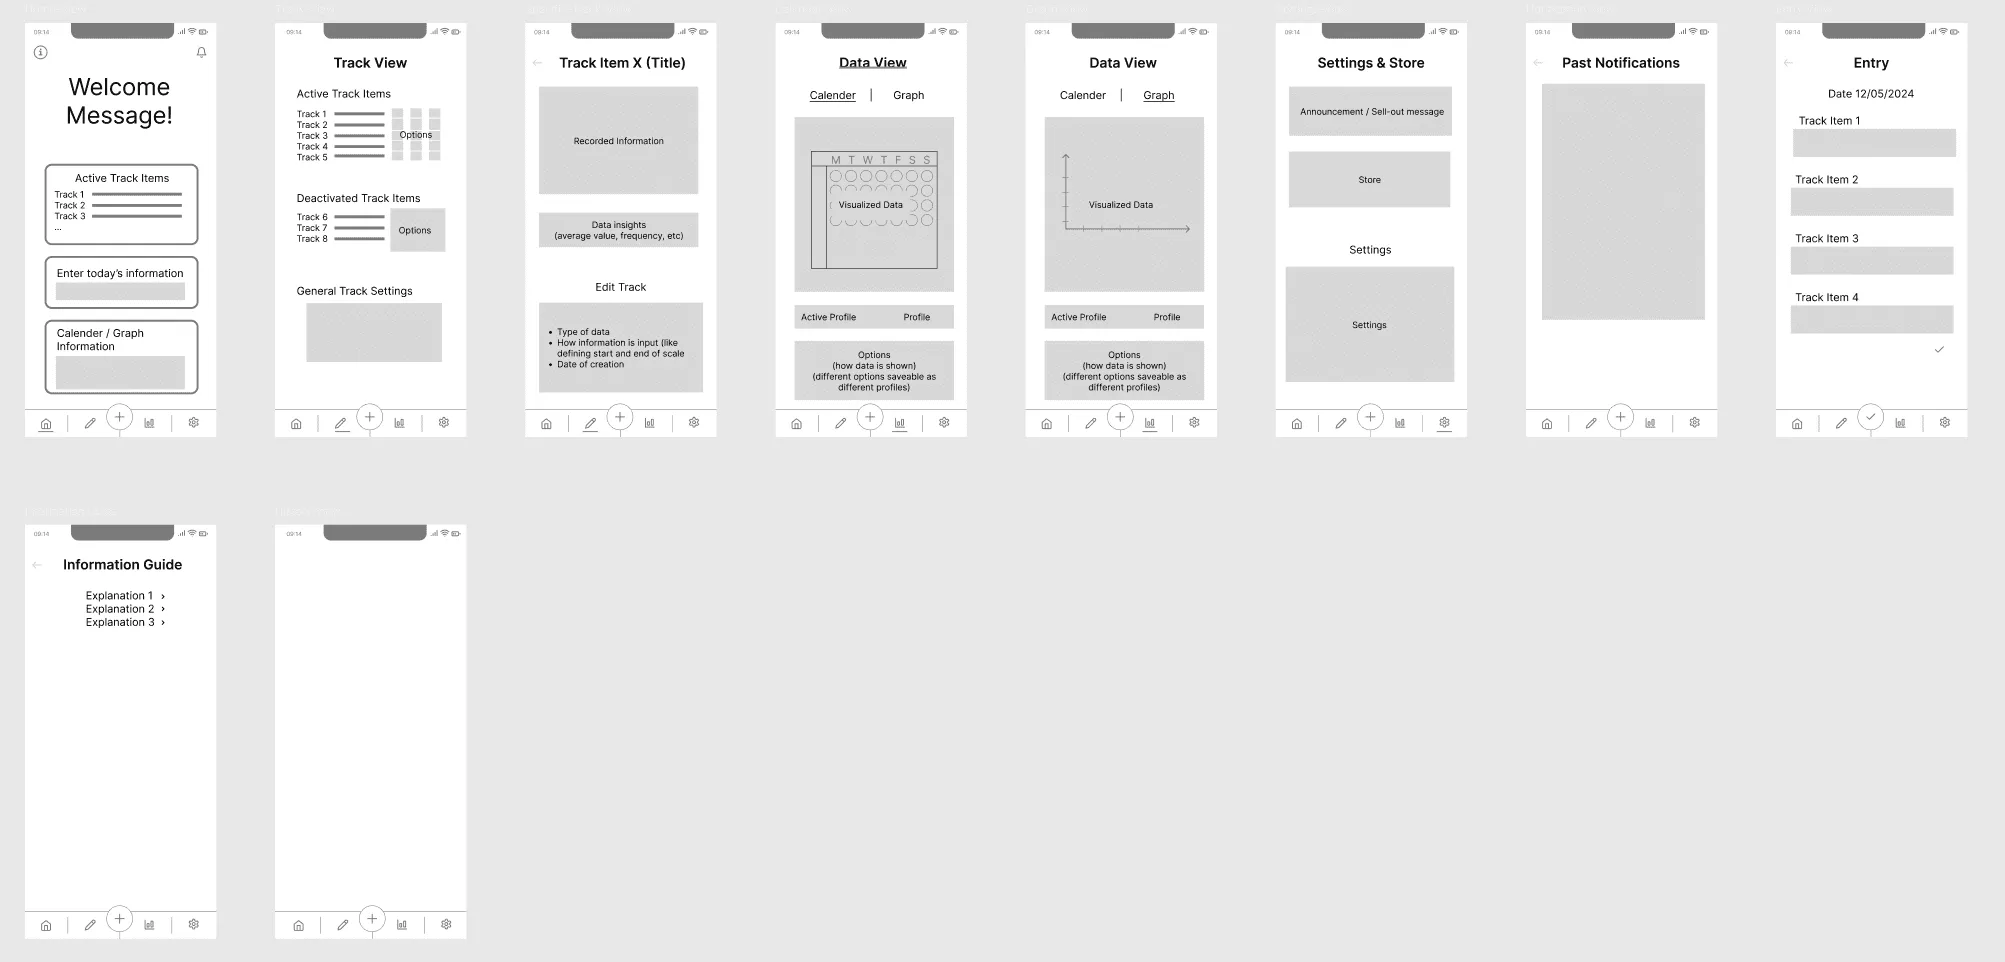 Wireframe showcasing possible view and elements of mobile app